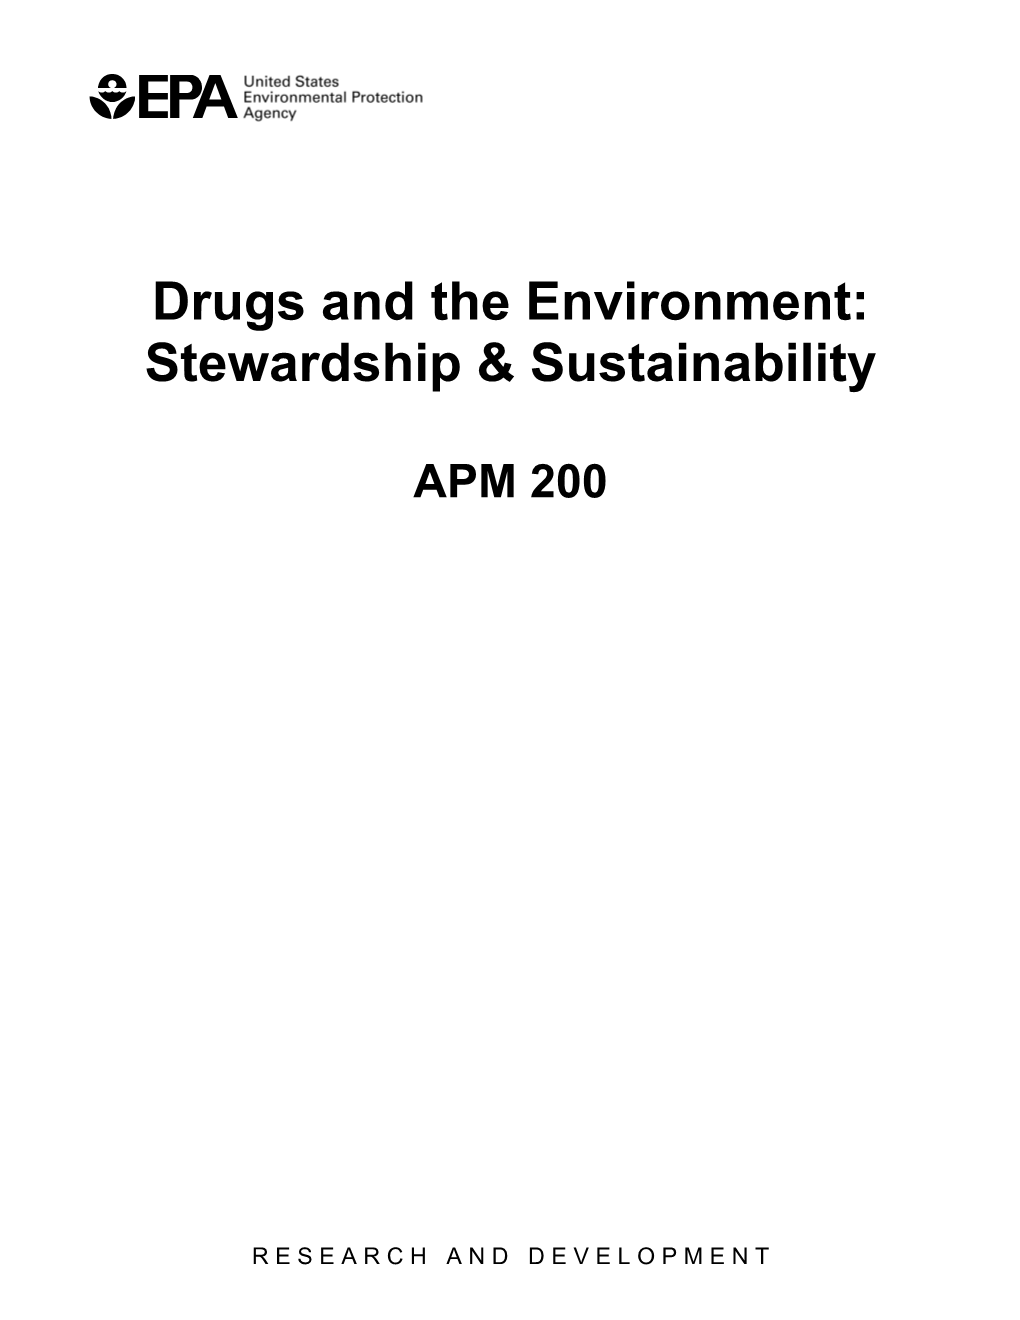 Drugs and the Environment: Stewardship & Sustainability